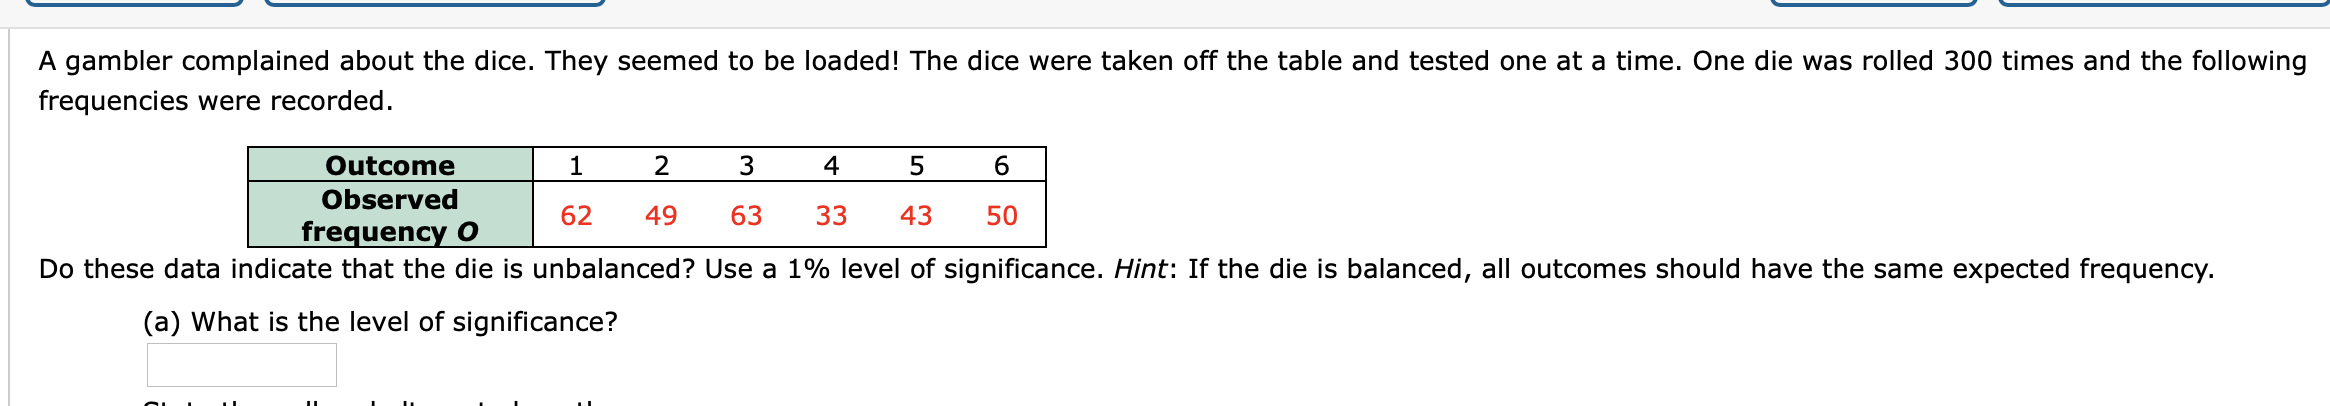 A gambler complained about the dice. They seemed to be loaded! The dice were taken off the table and tested one at a time. One die was rolled 300 times and the following
frequencies were recorded.
Outcome
Observed
frequency O
2
4
62
49
63
33
43
50
Do these data indicate that the die is unbalanced? Use a 1% level of significance. Hint: If the die is balanced, all outcomes should have the same expected frequency.
(a) What is the level of significance?
